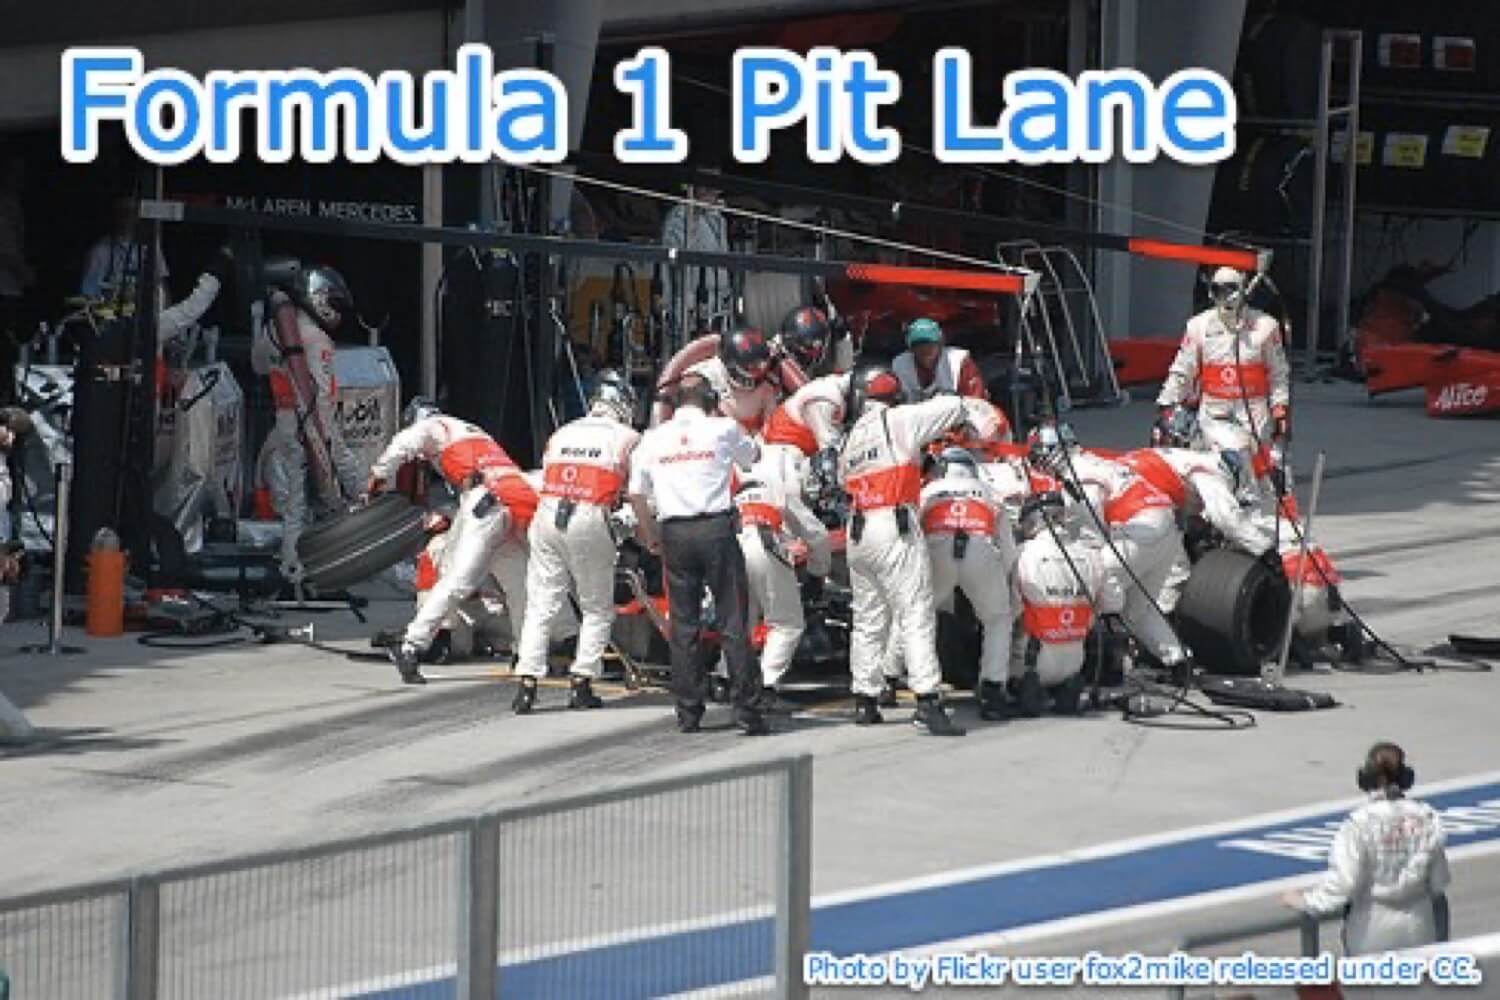 F1 Pit Lane - Iterate Quickly and Focus on the Essential